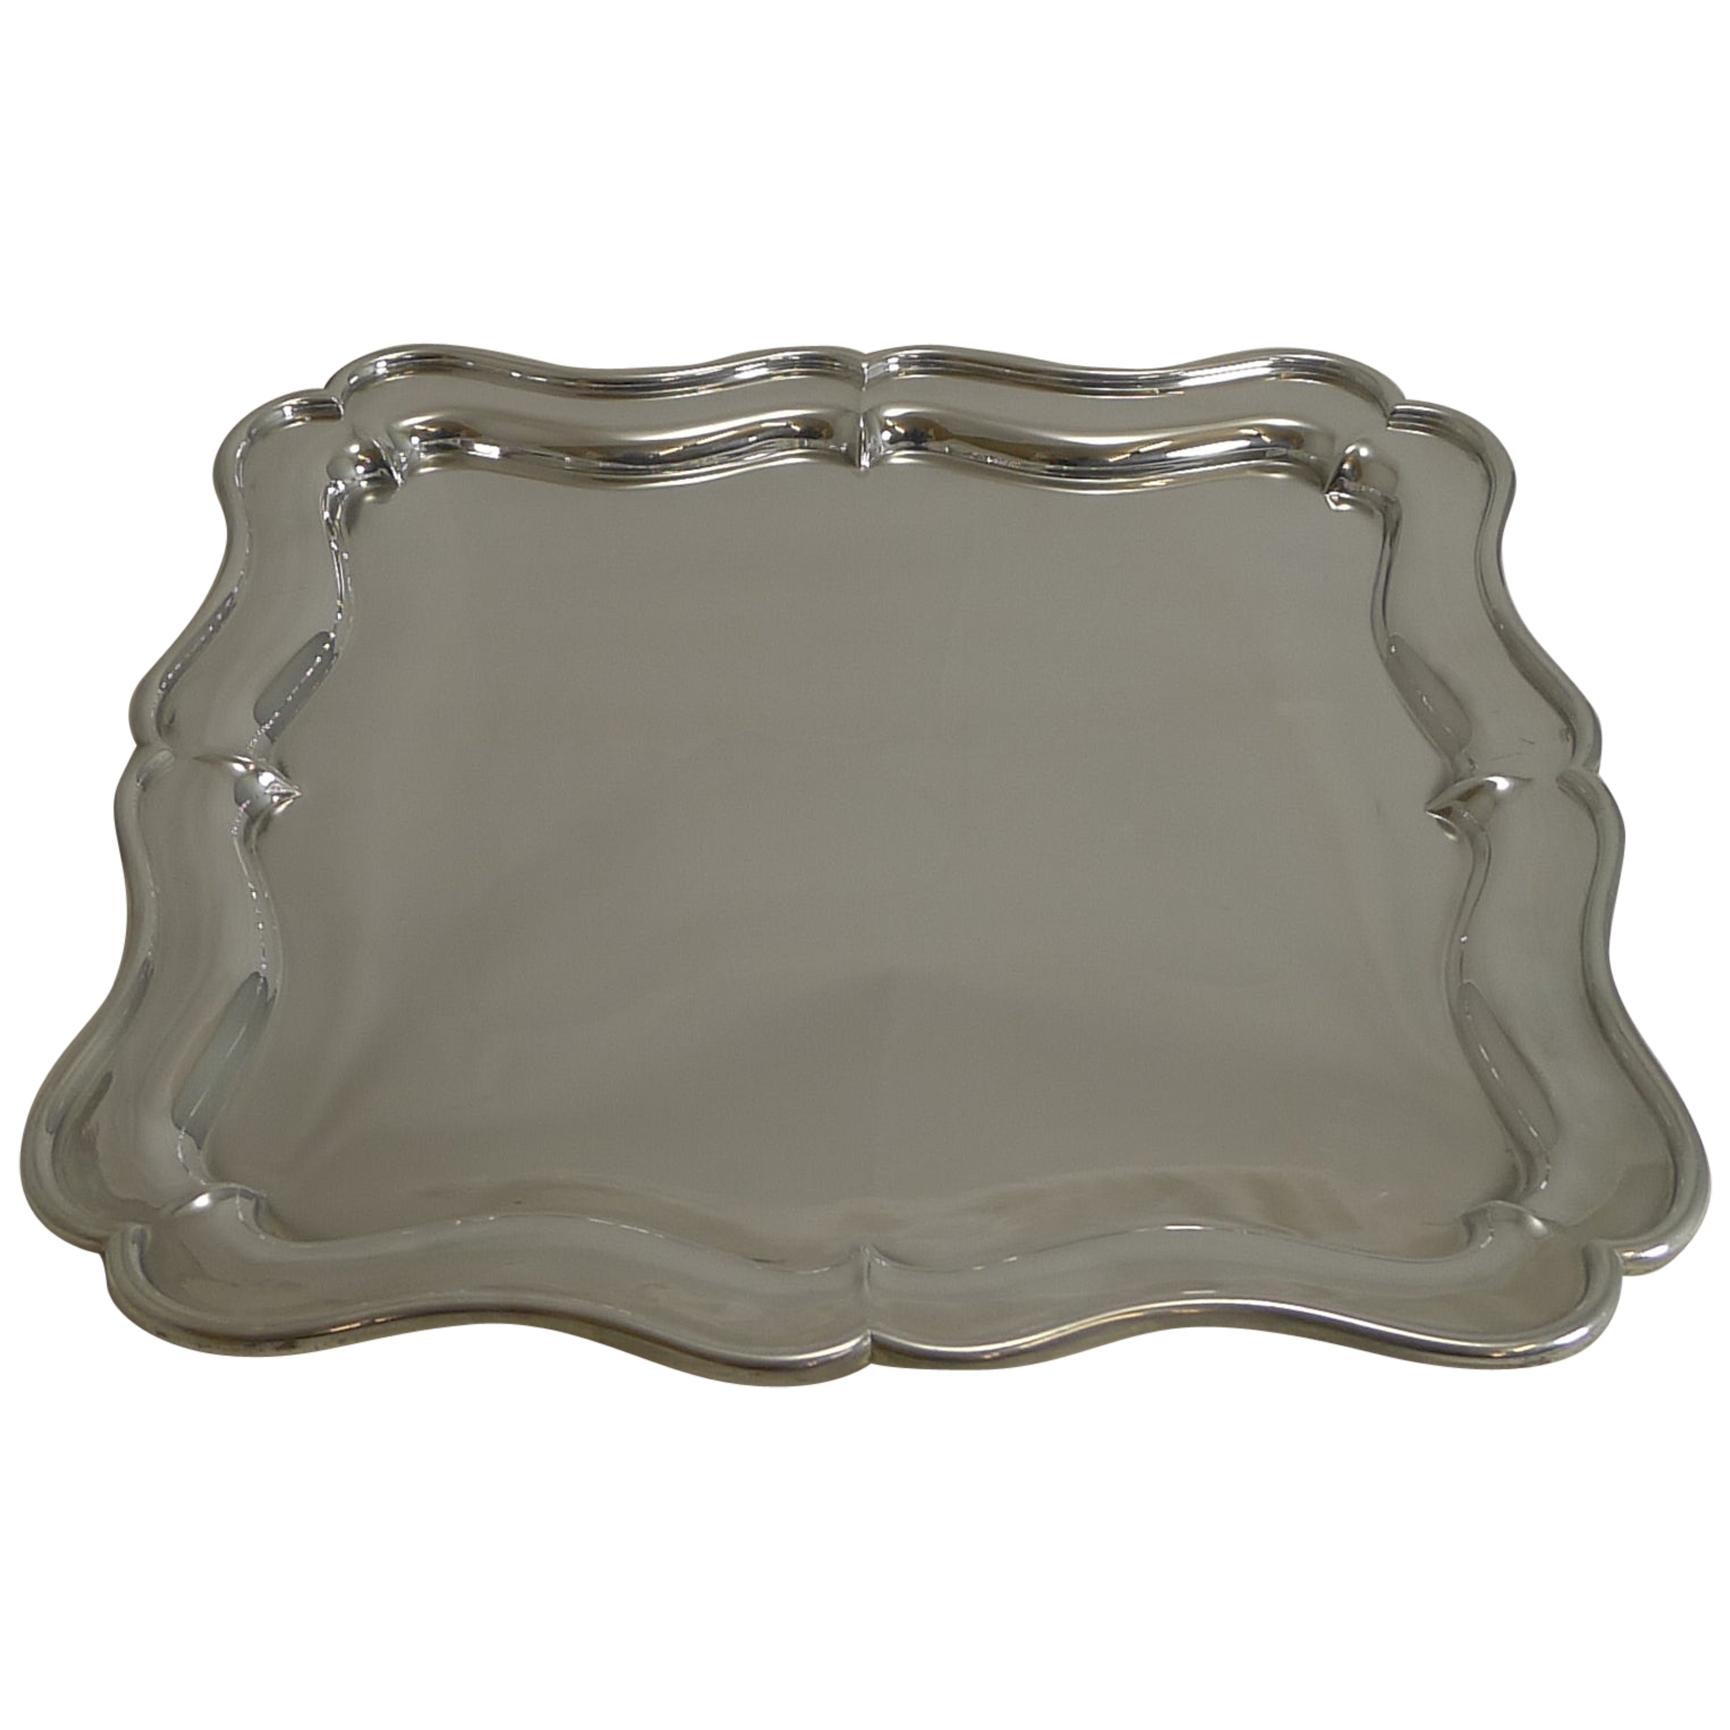 Antique English Silver Plated Cocktail / Drinks Tray by Martin Hall, circa 1900